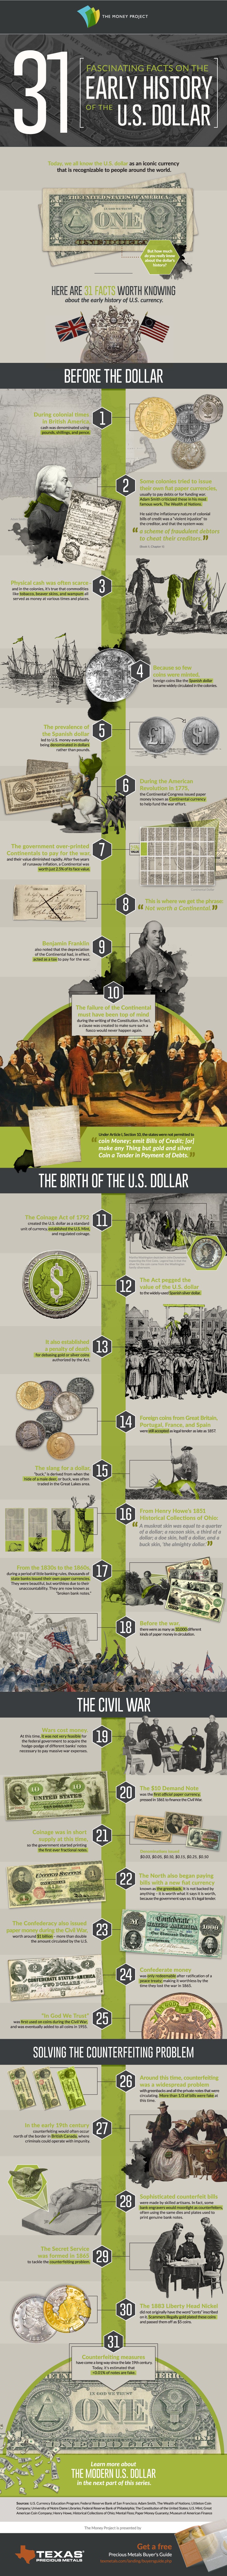 31 Fascinating Facts on the Early History of the U.S. Dollar